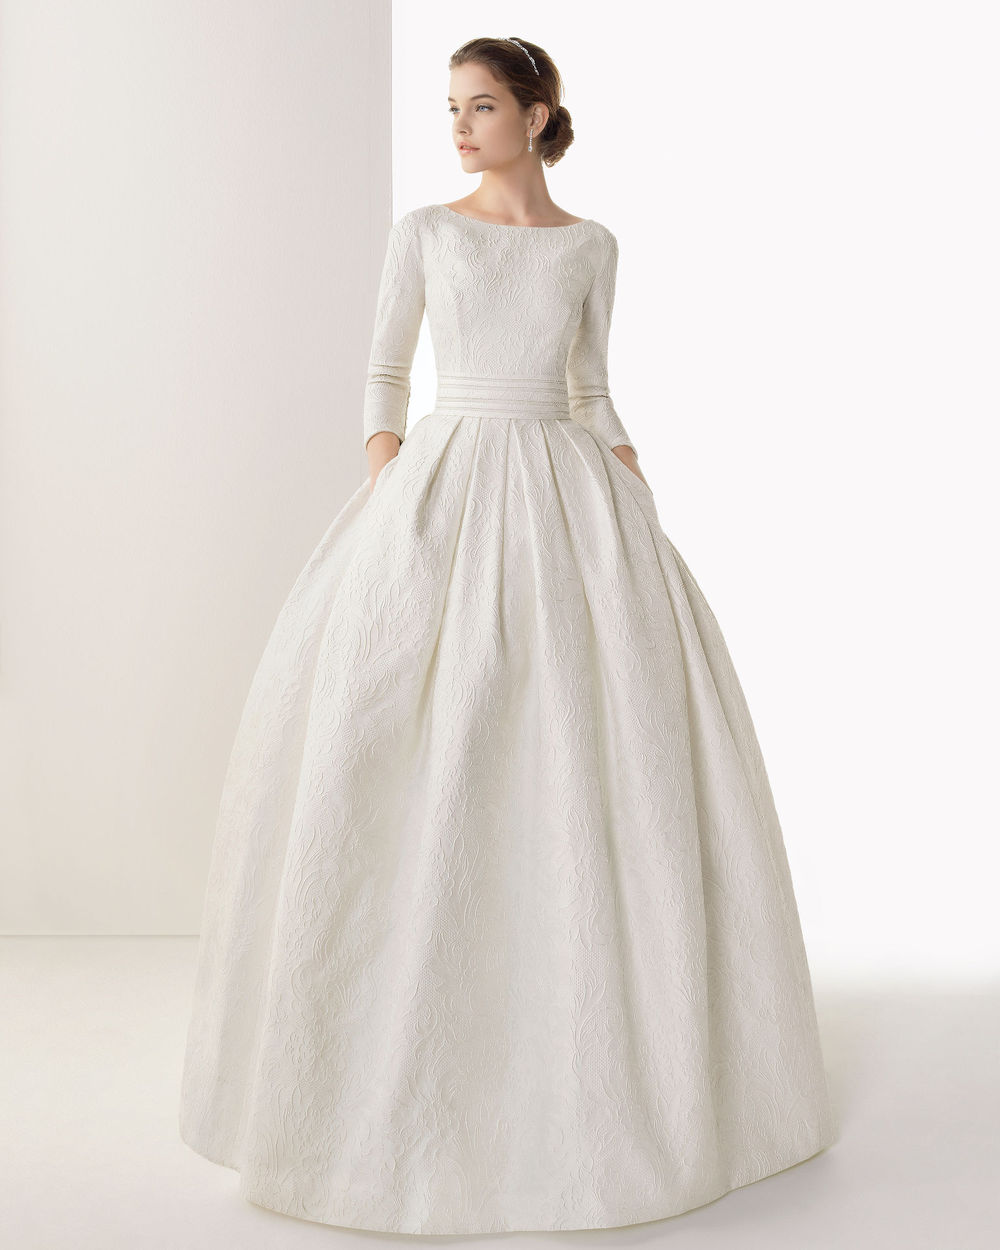 A high neck wedding dress with long sleeves